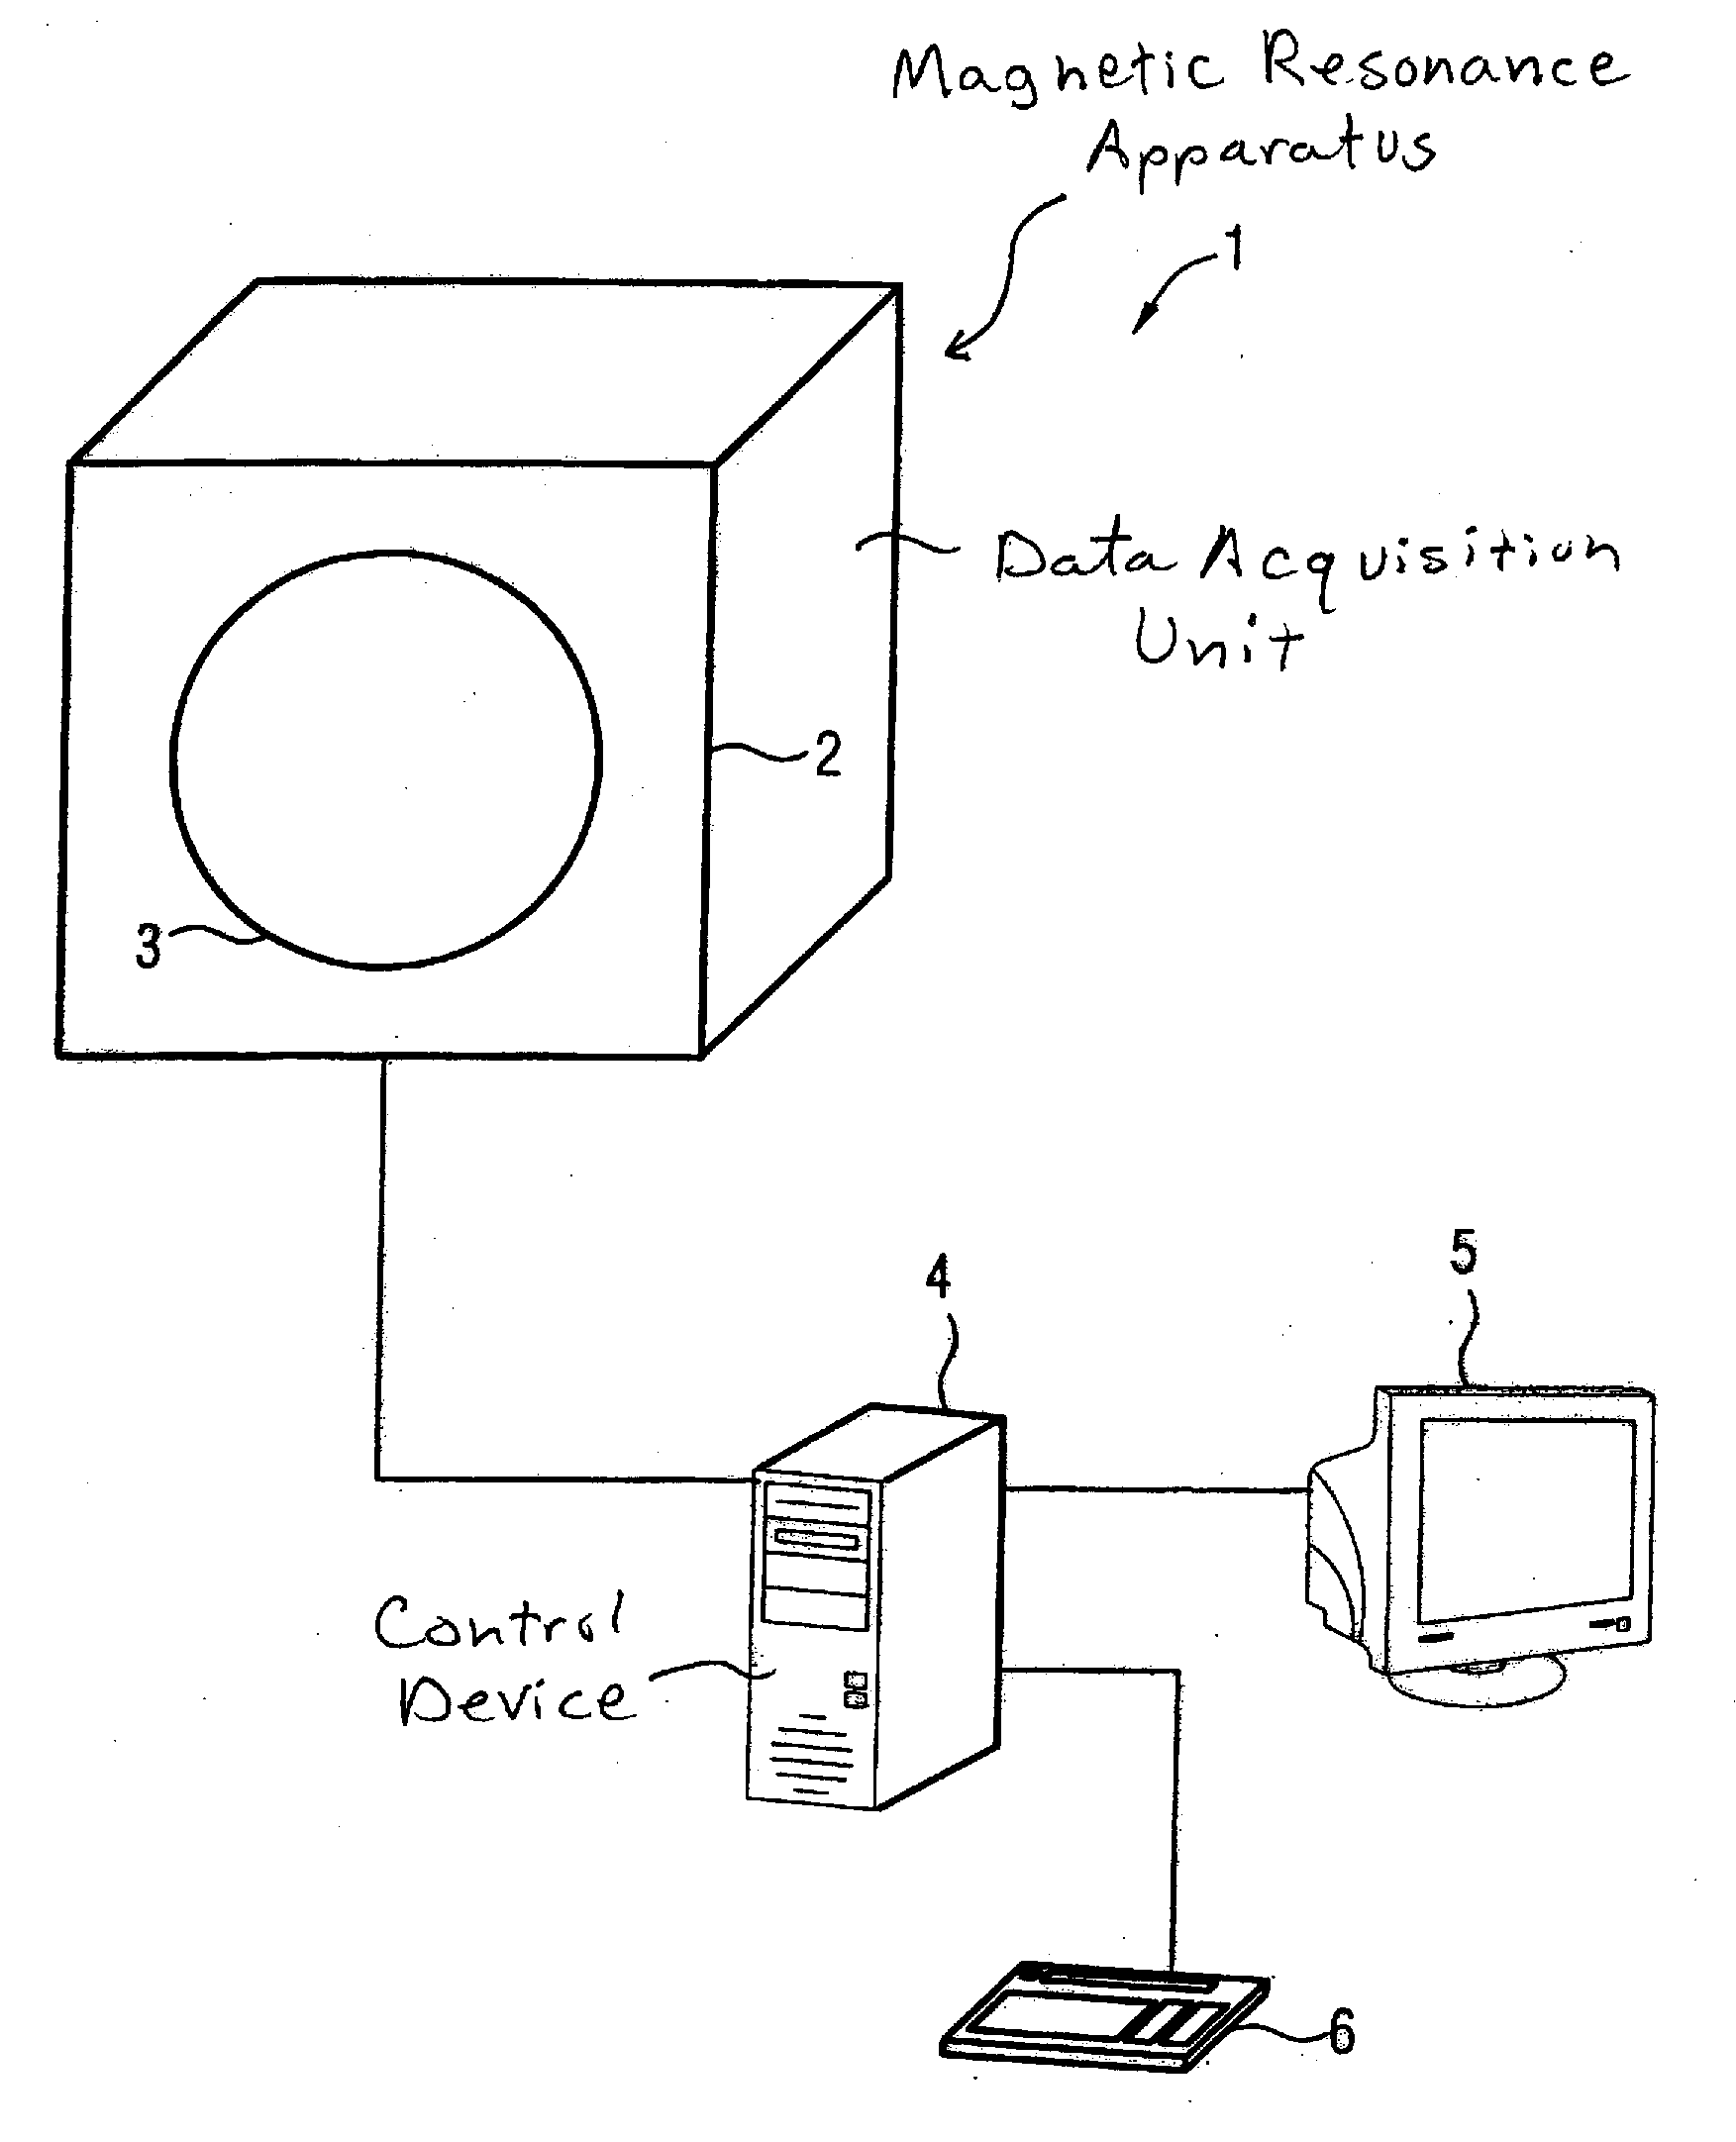 Method to acquire image data sets with a magnetic resonance apparatus